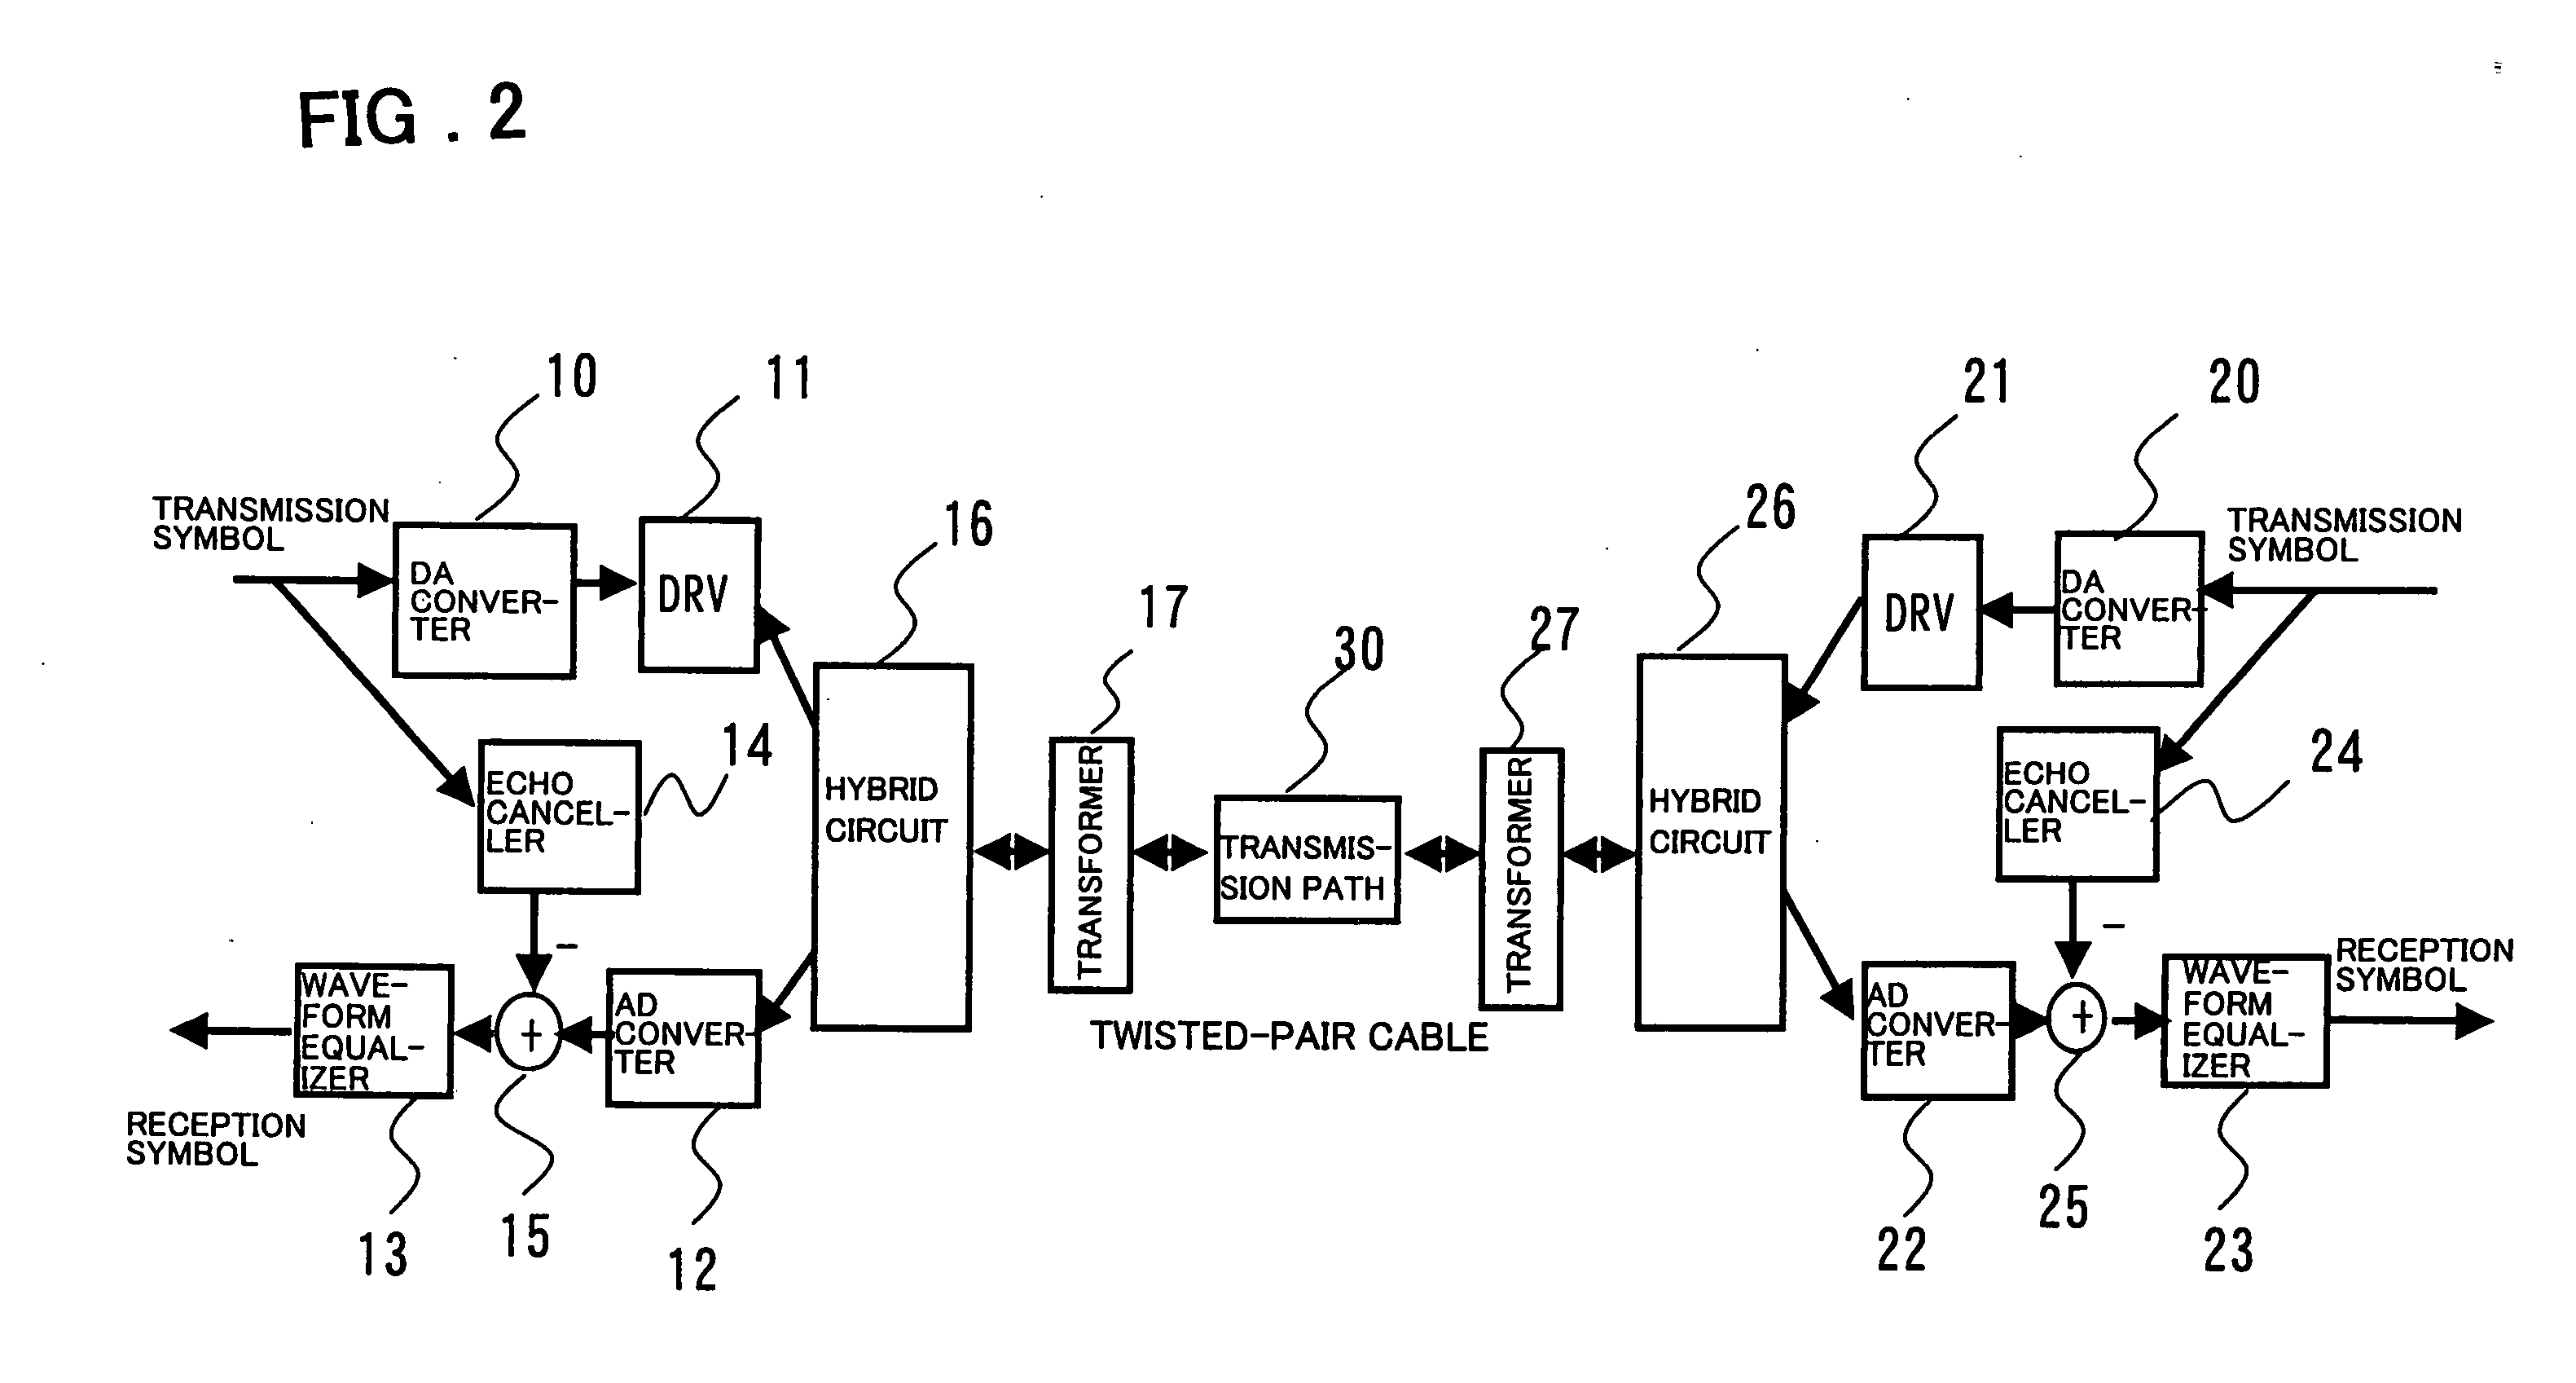 Canceller device and data transmission system